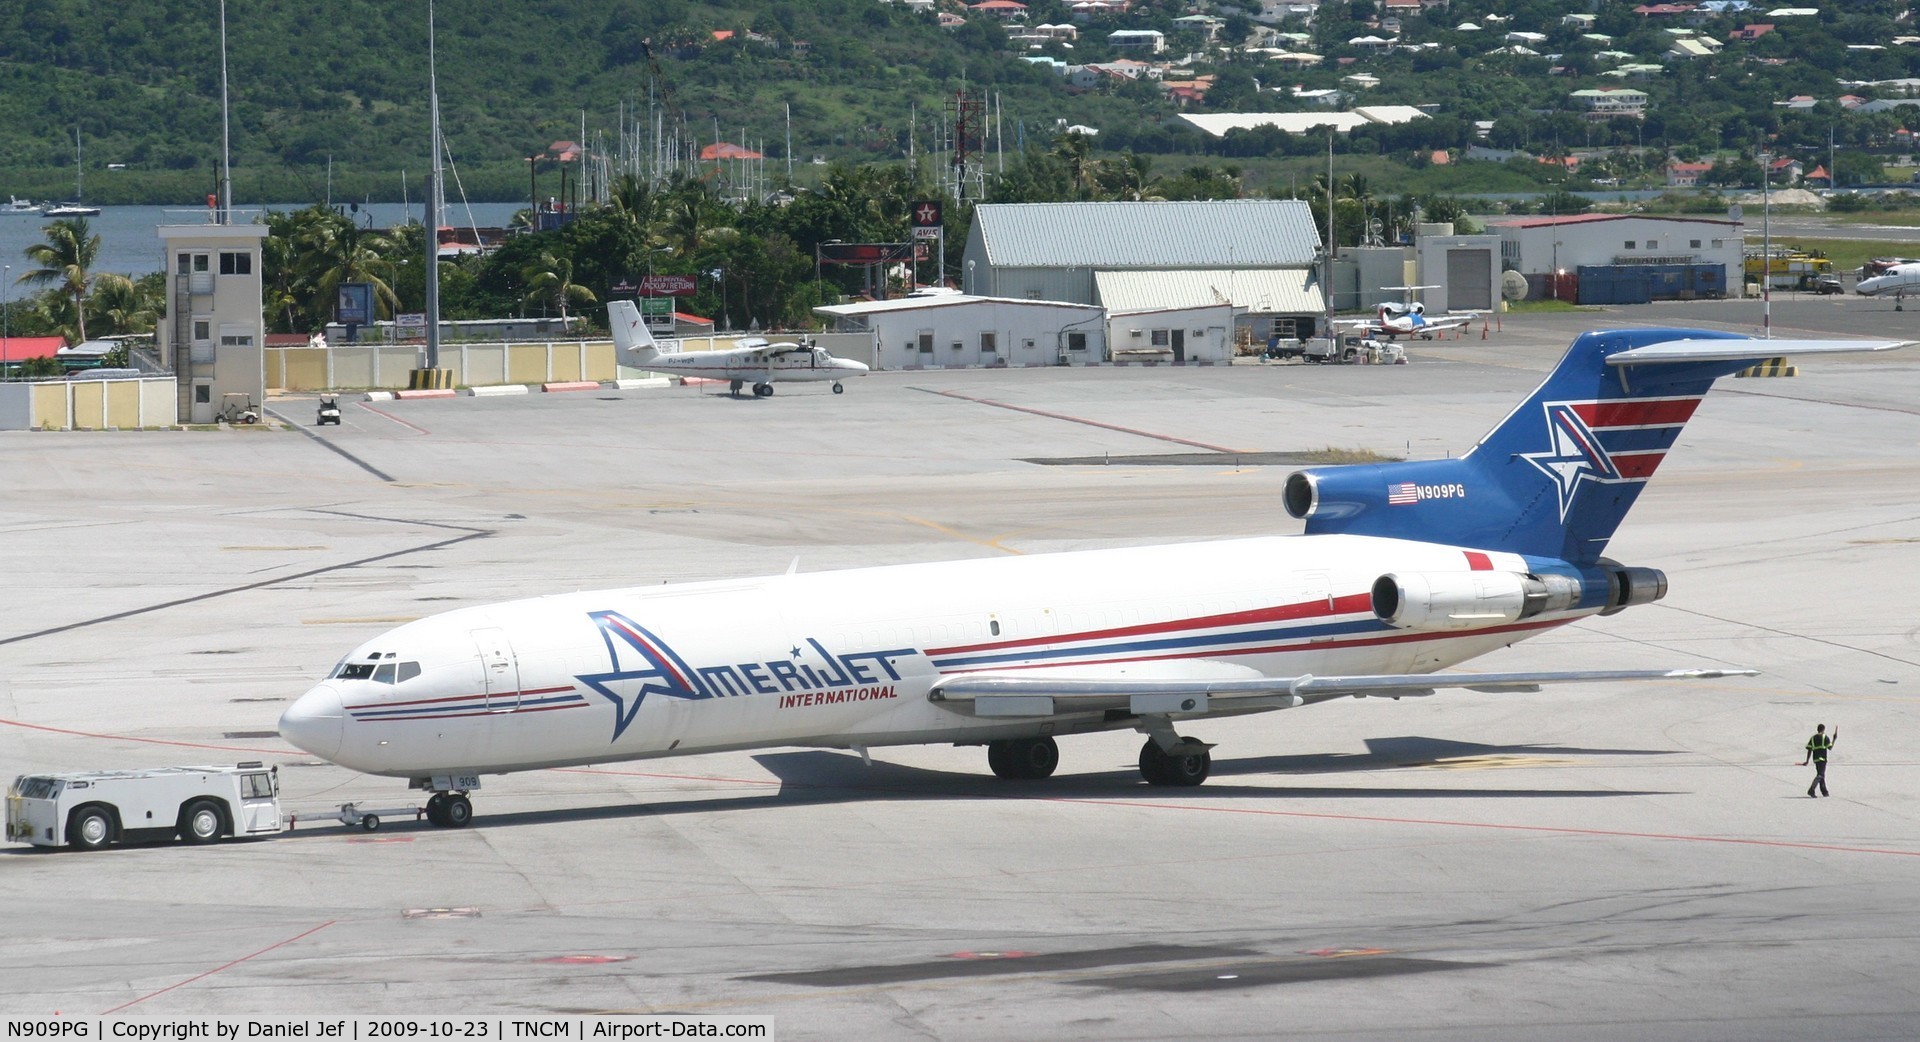 N909PG, 1979 Boeing 727-2K5 C/N 21852, Being push back from its parking